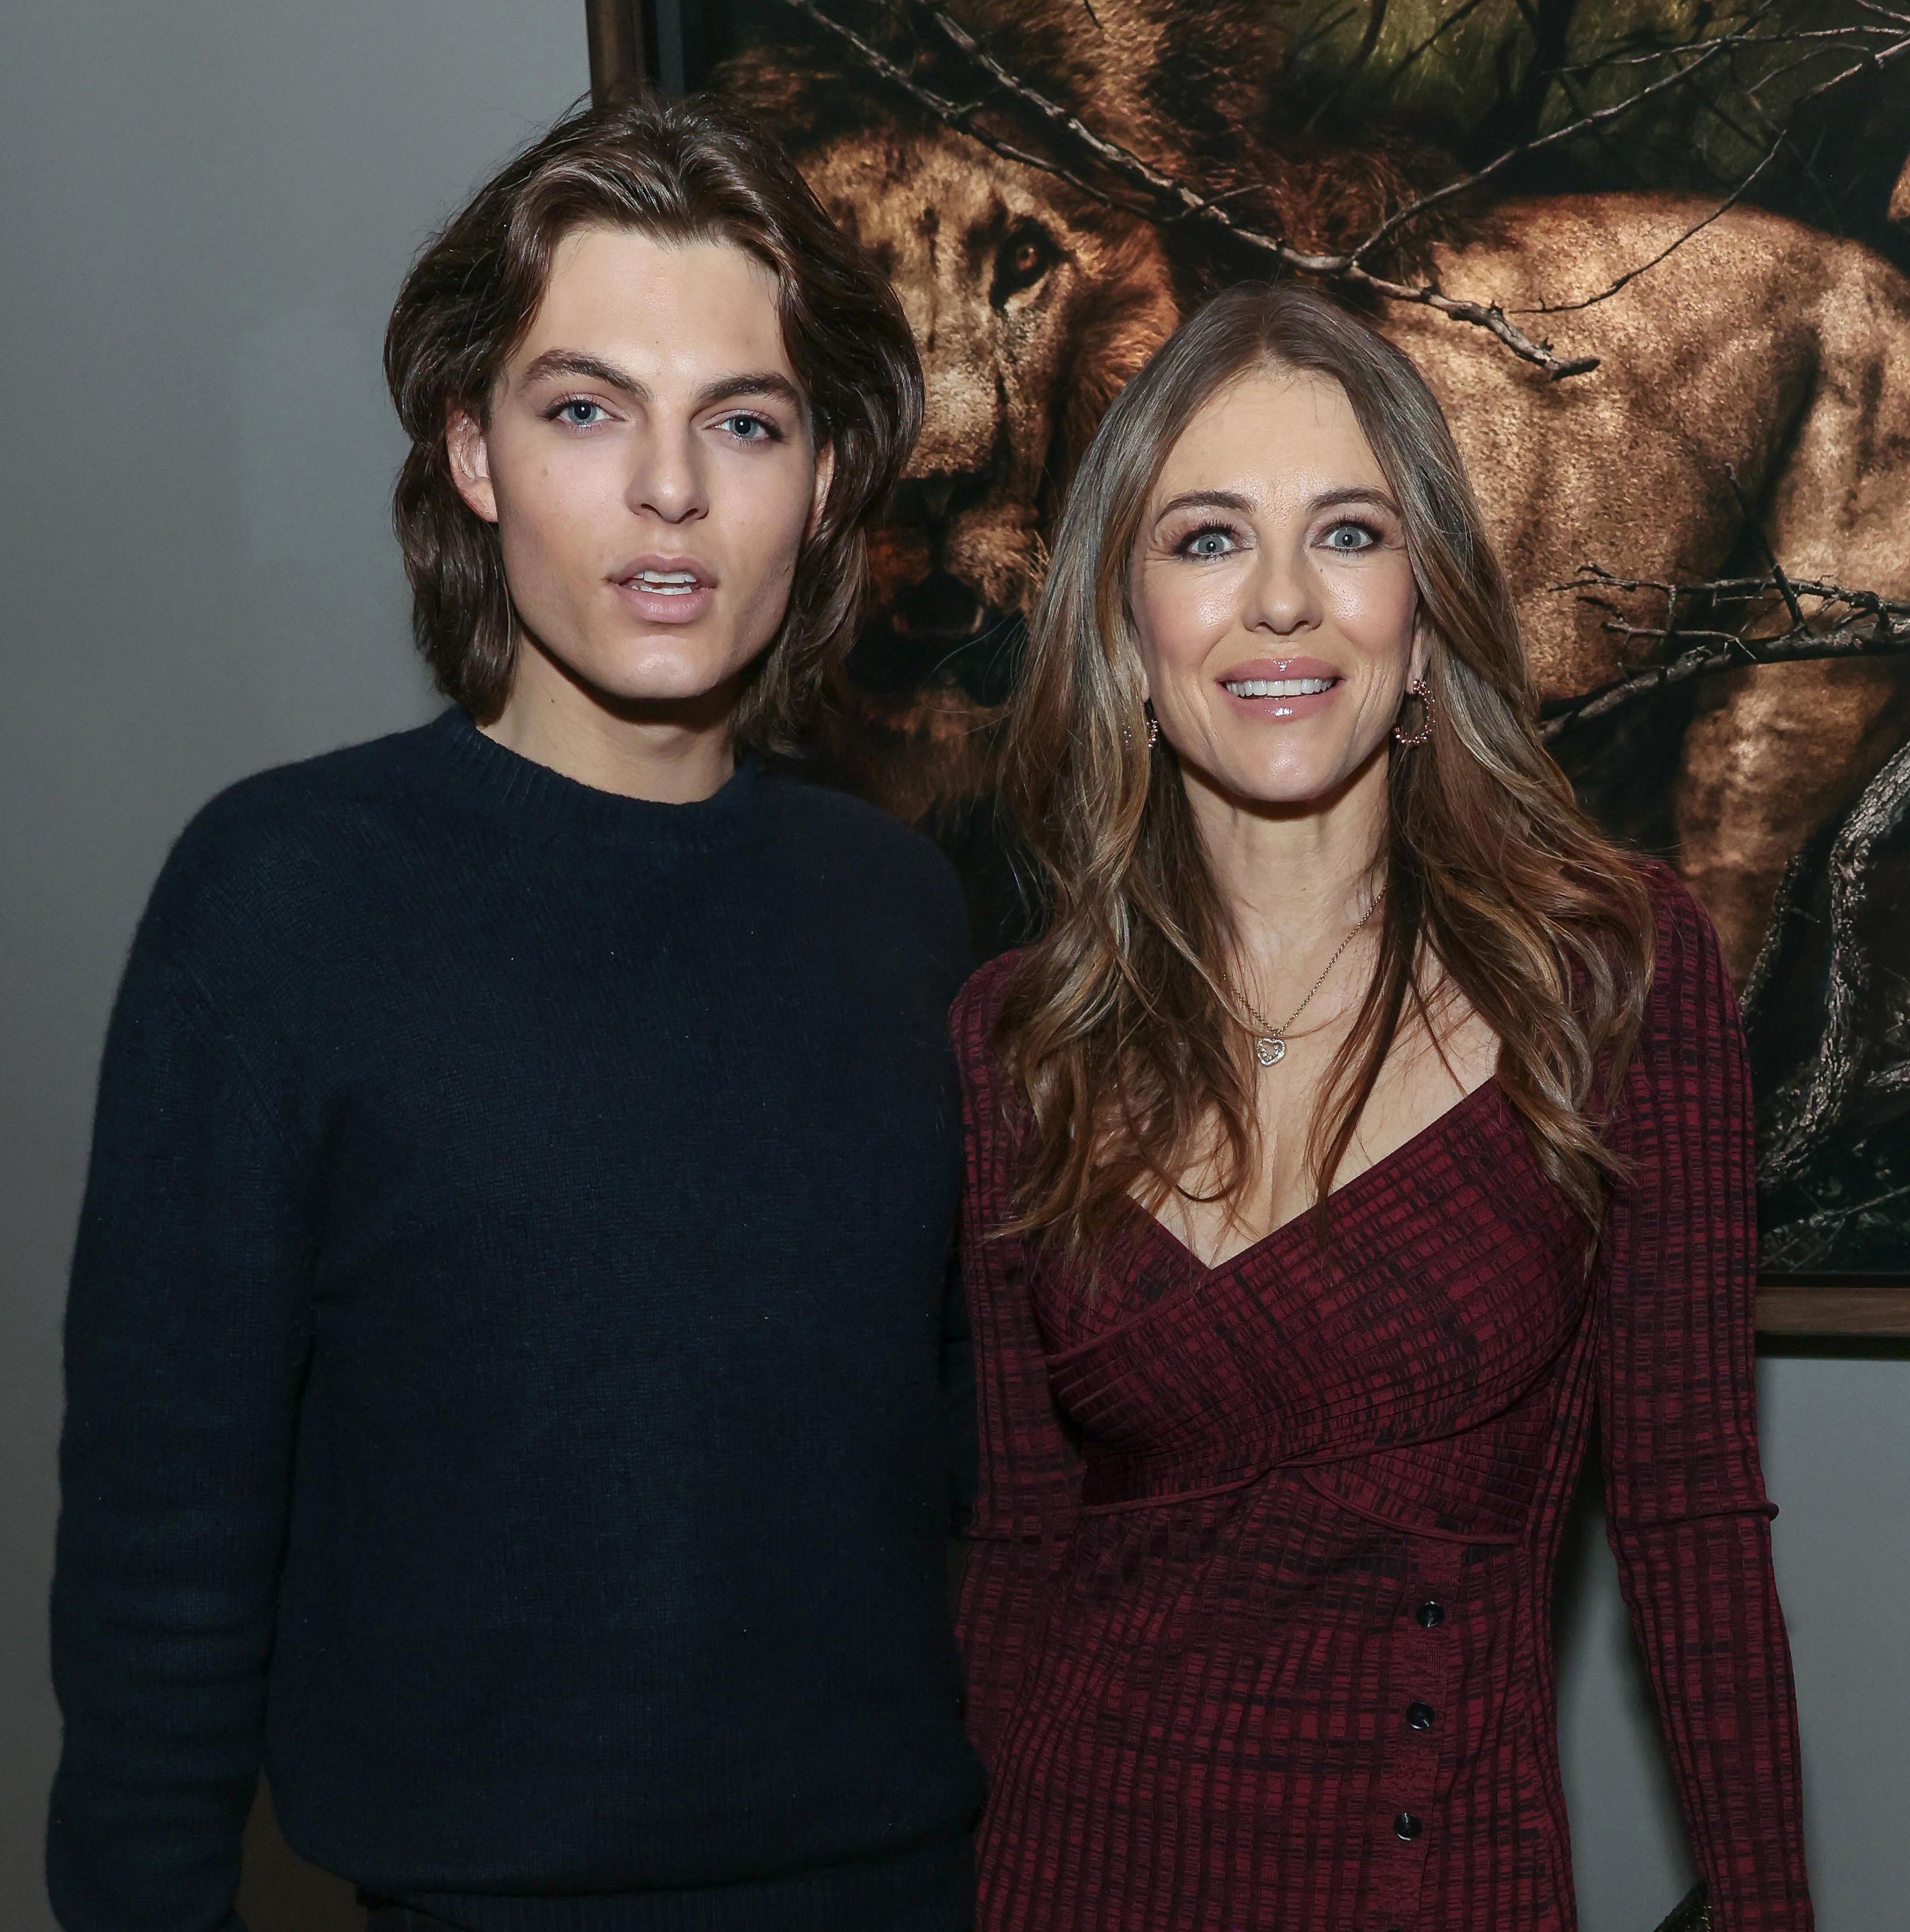 Elizabeth Hurley and Damian Hurley standing together, both wearing sweaters